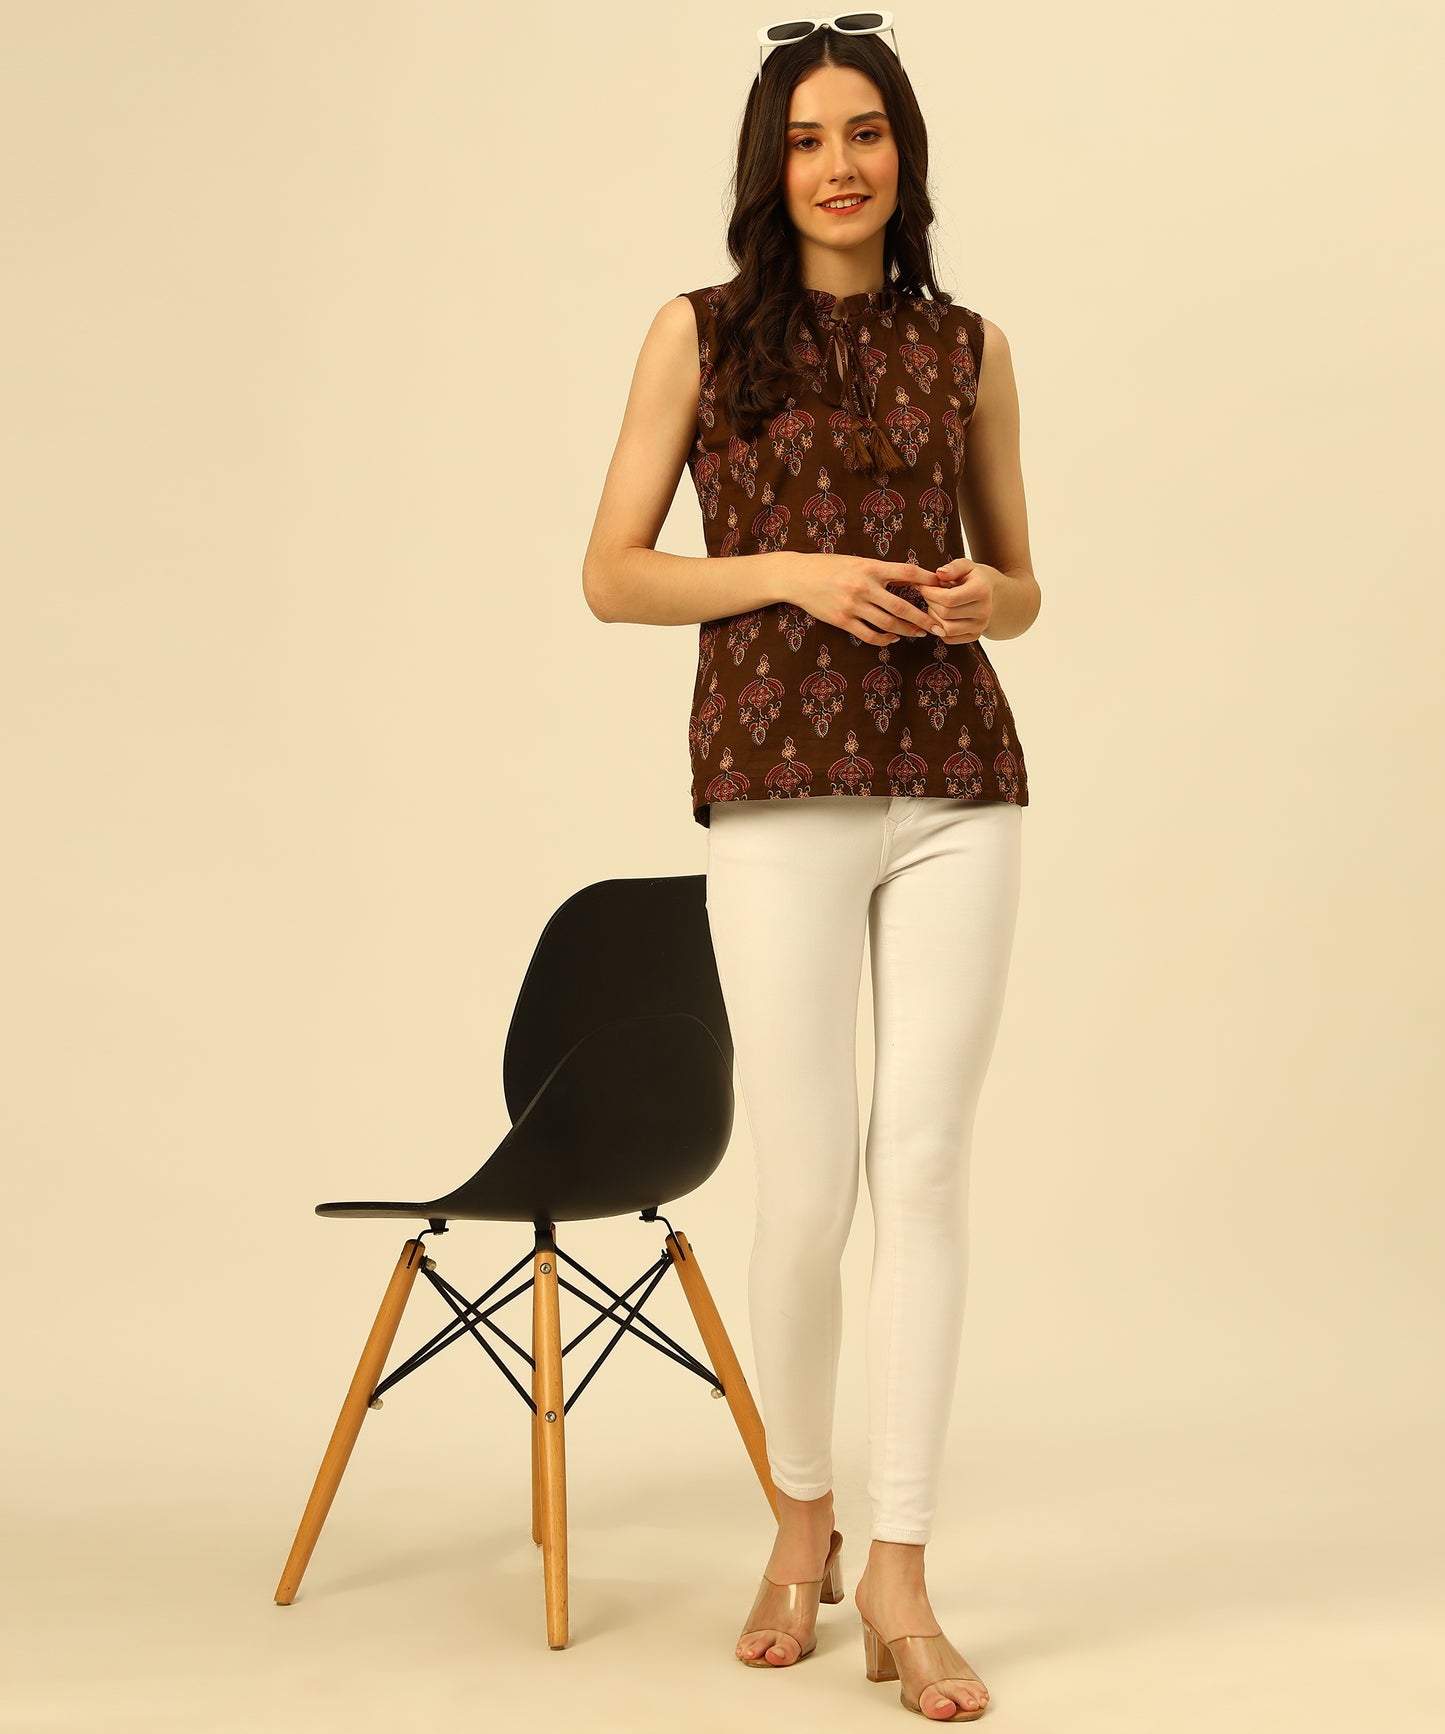 Cotton Printed Top Sleeveless Regular Fit Office Wear Casual Wear Top,Brown